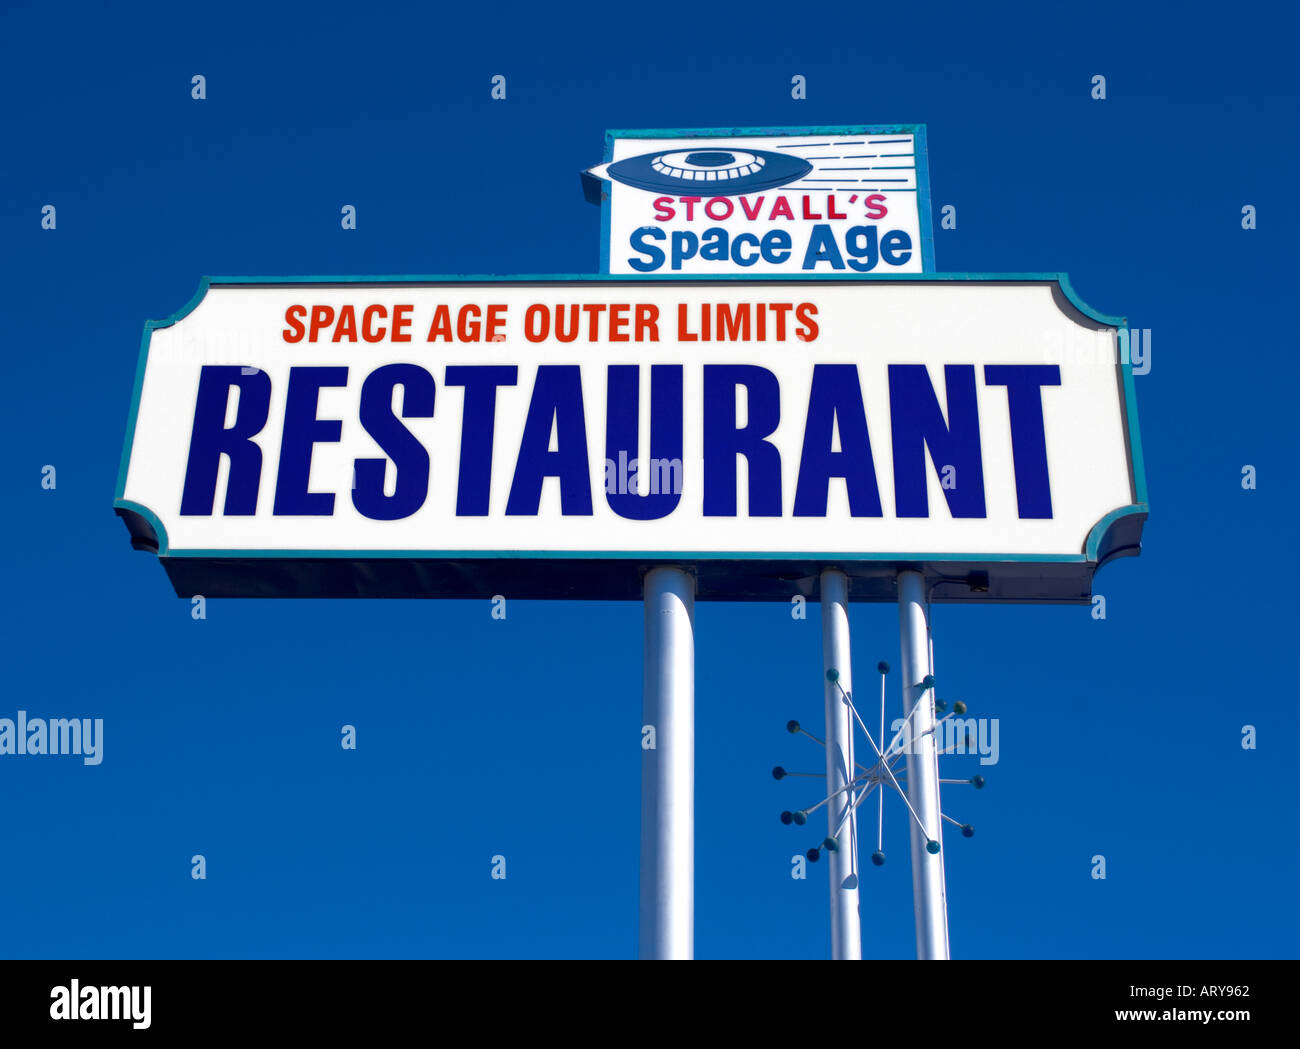 Stovalls Space Age Outer Limits Restaurant Zeichen in Gila Bend Arizona Stockfoto